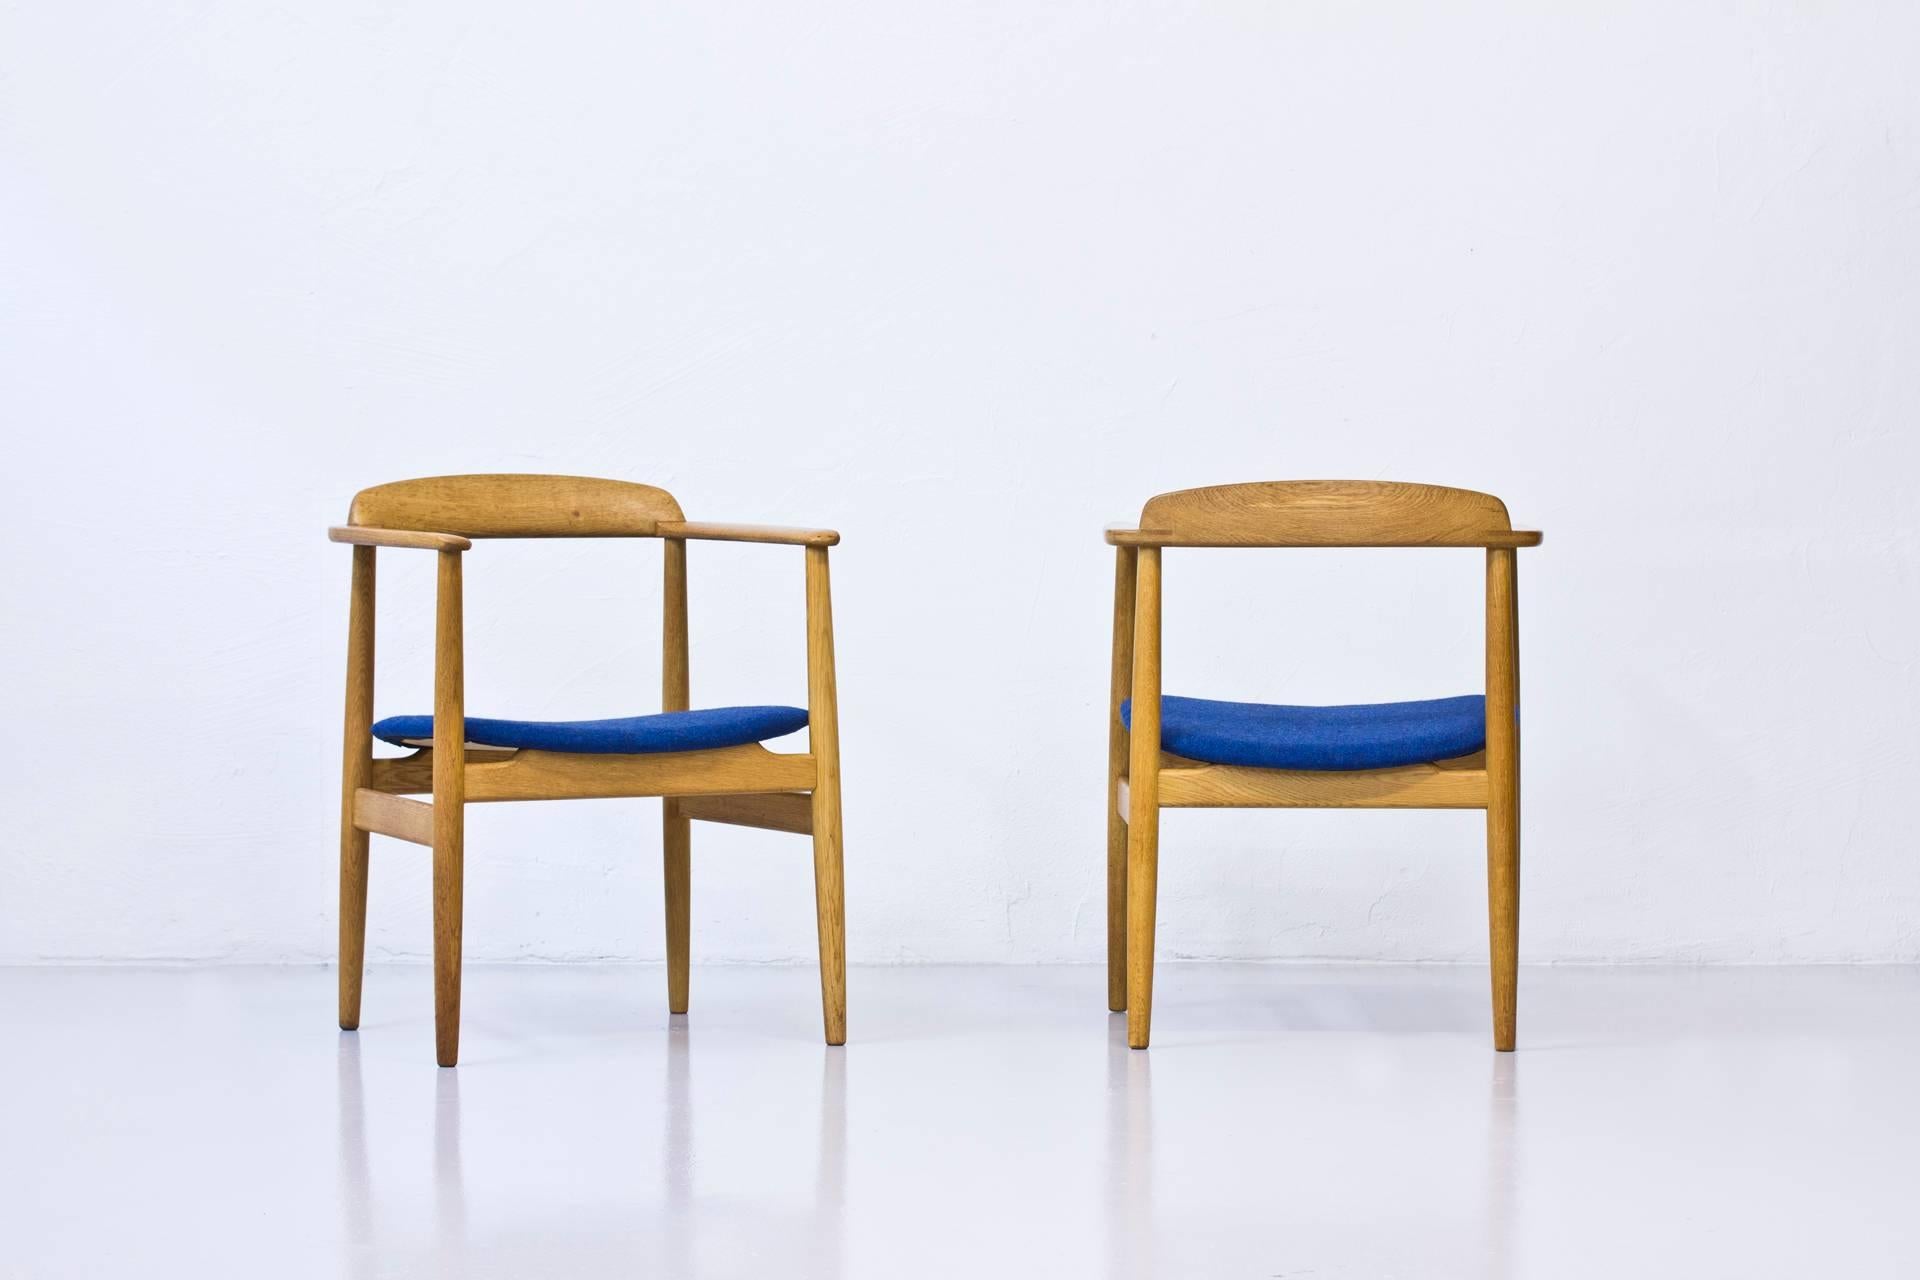 Rare armchairs designed by Alf Svensson during the early 1960s. Produced by his own company Bjästa Möbelfabrik in Sweden. This pair produced in 1961. (Signed). Solid oak frame in very good condition with minor scratches and marks consistent with